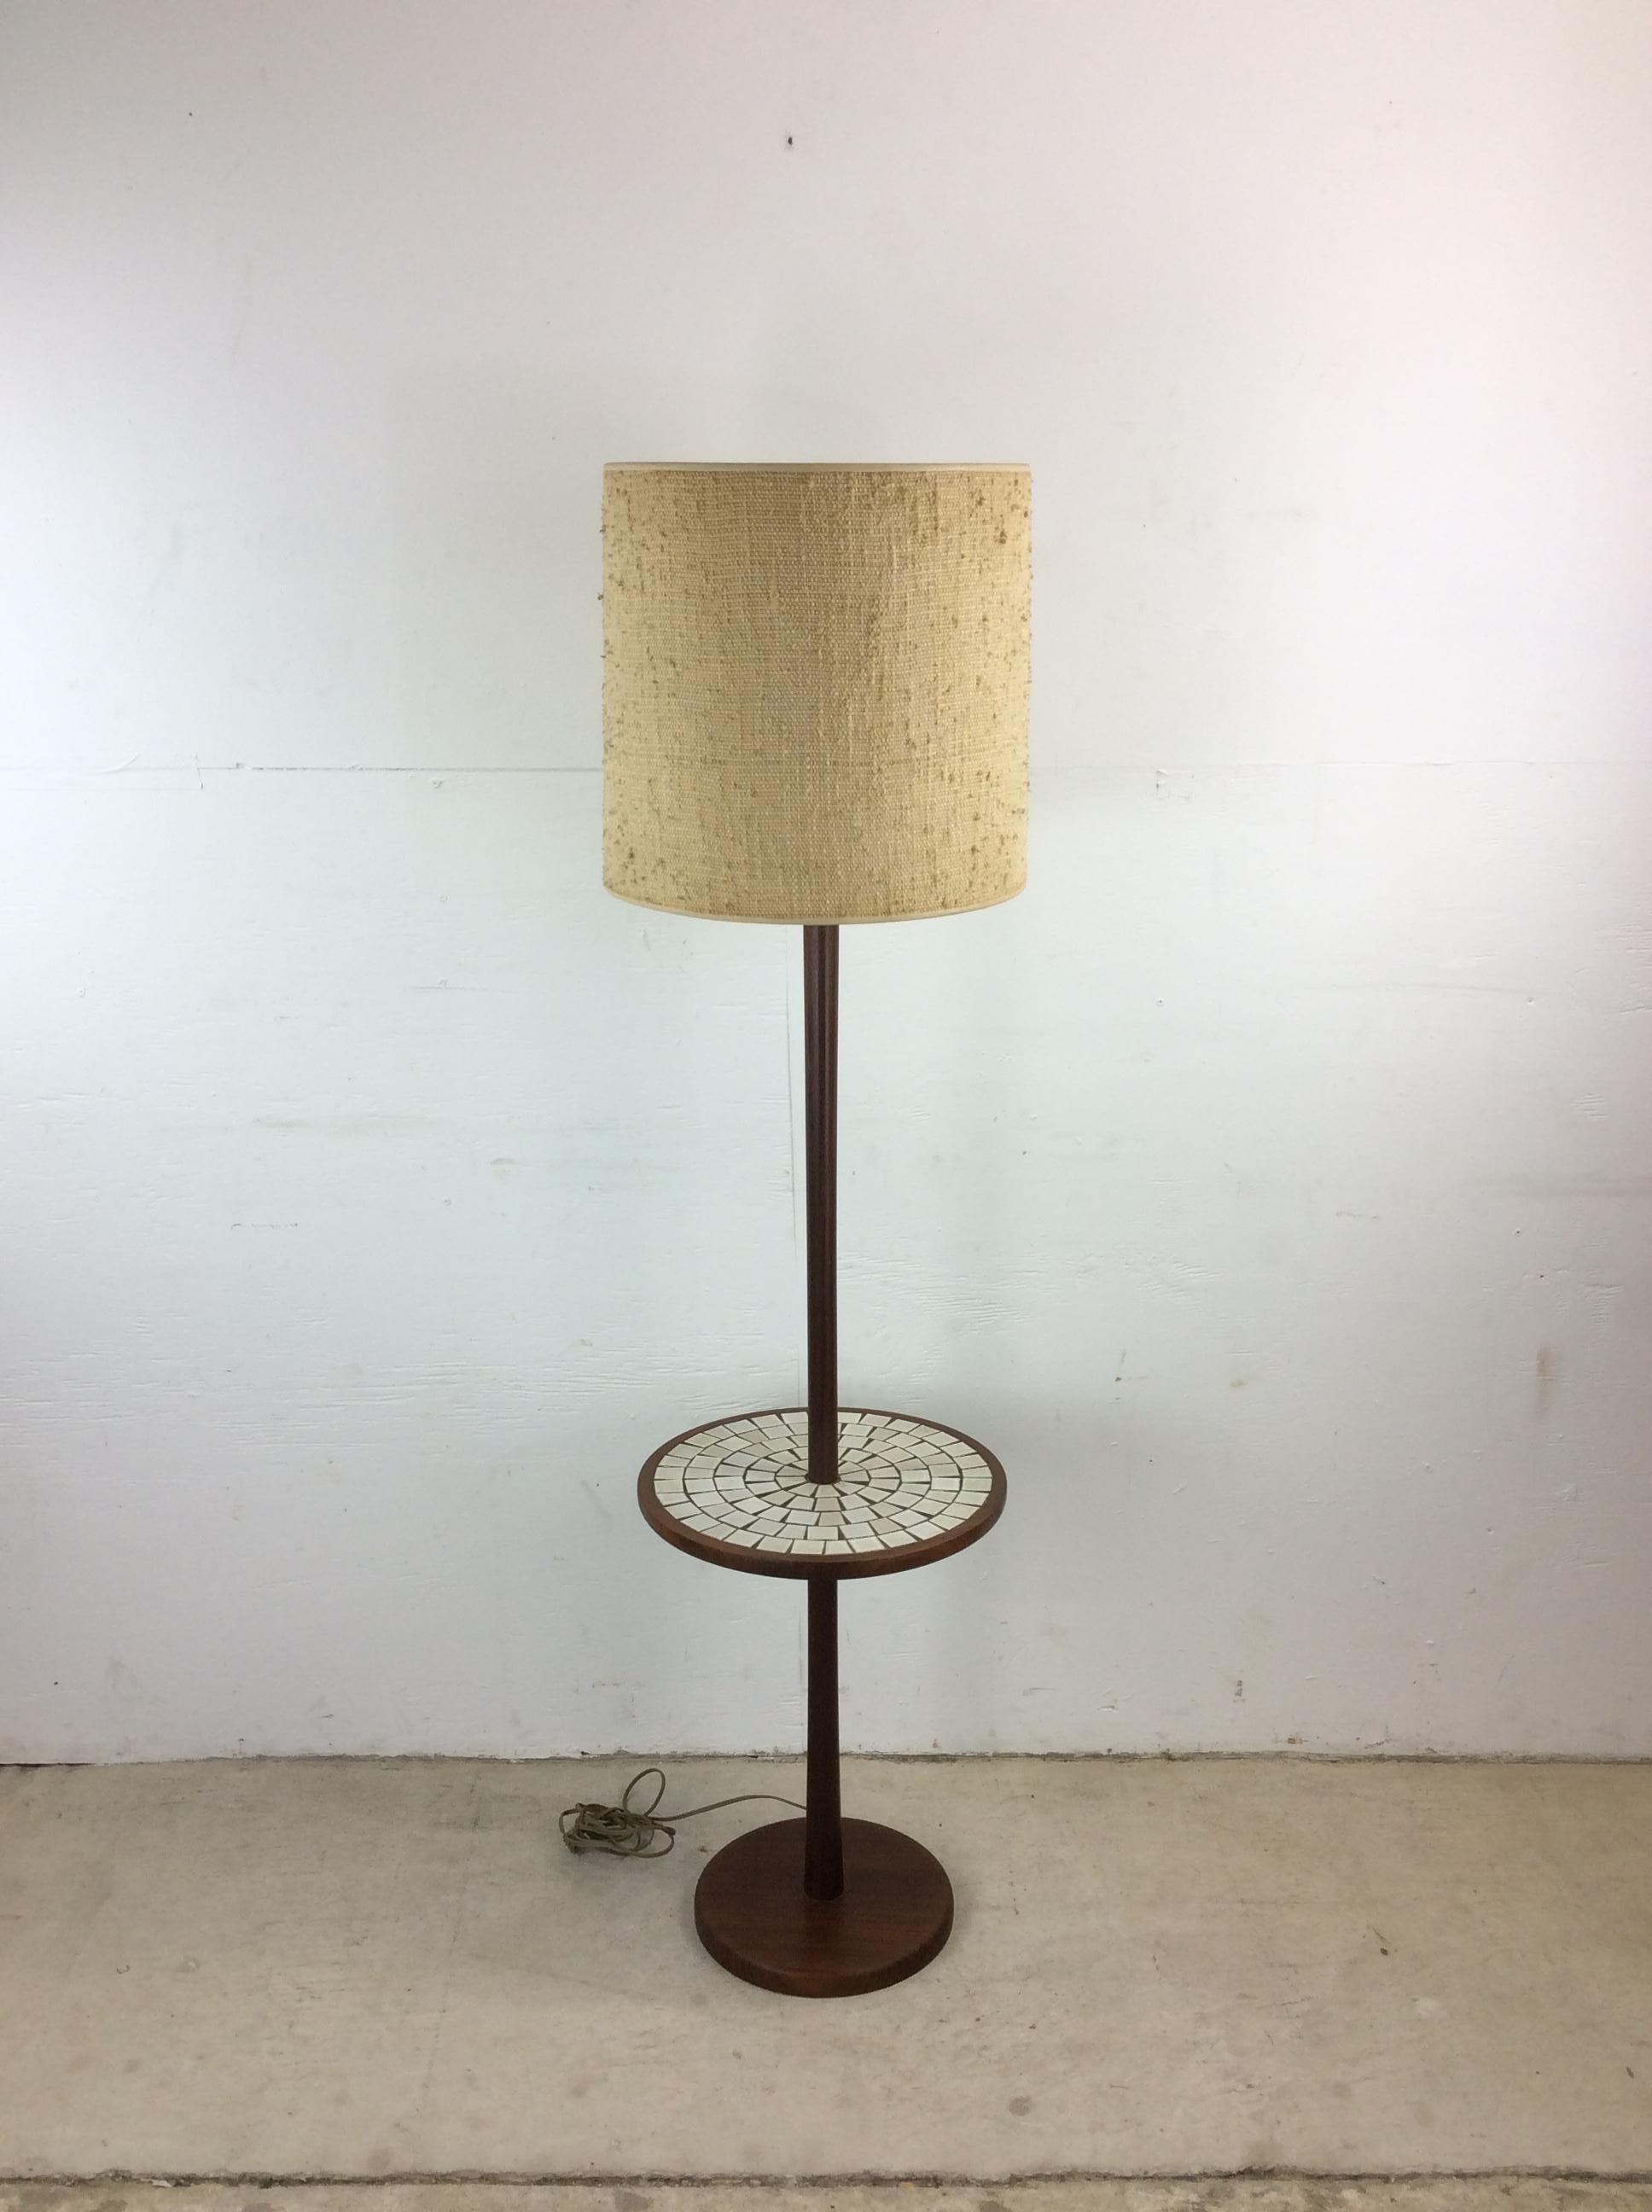 This mid century modern floor lamp features solid walnut construction, built-in round table with mosaic tile, vintage barrel shade, and solid wood finial. 

Dimensions: 15w 15d 60h

Condition: Original finish is in excellent condition. There are